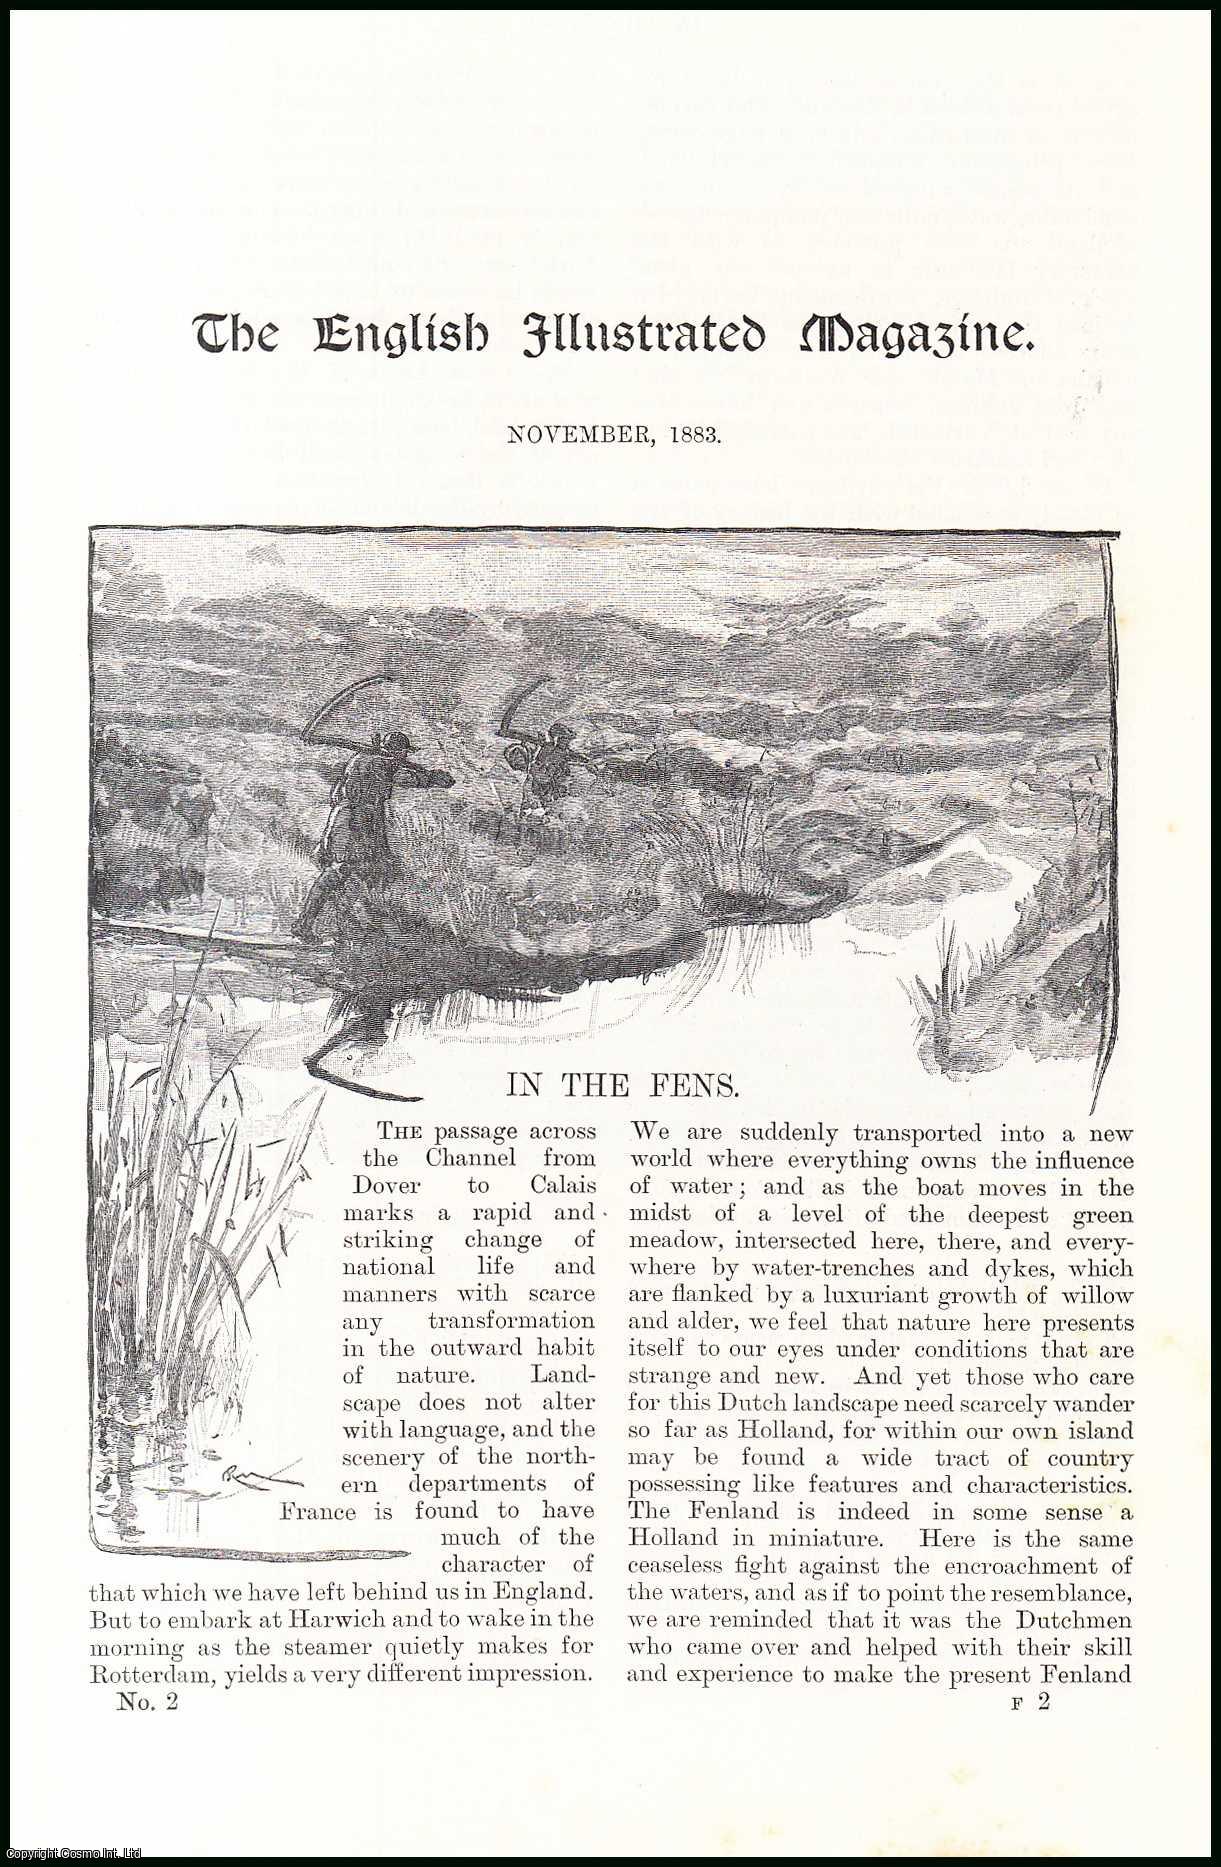 Illustrations by R.W. Macbeth - In The Fens. An original article from the English Illustrated Magazine, 1884.